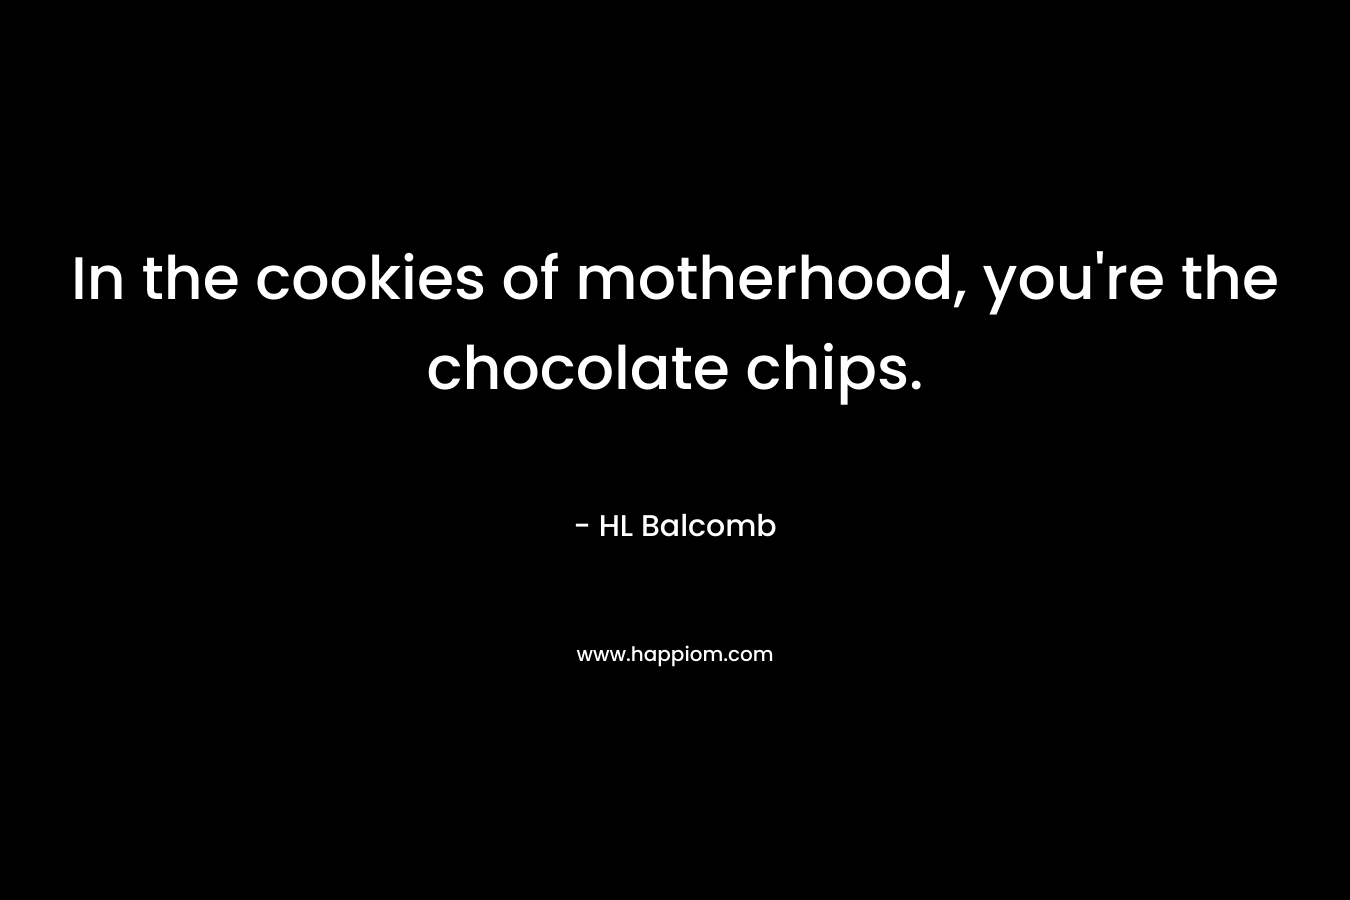 In the cookies of motherhood, you’re the chocolate chips. – HL Balcomb